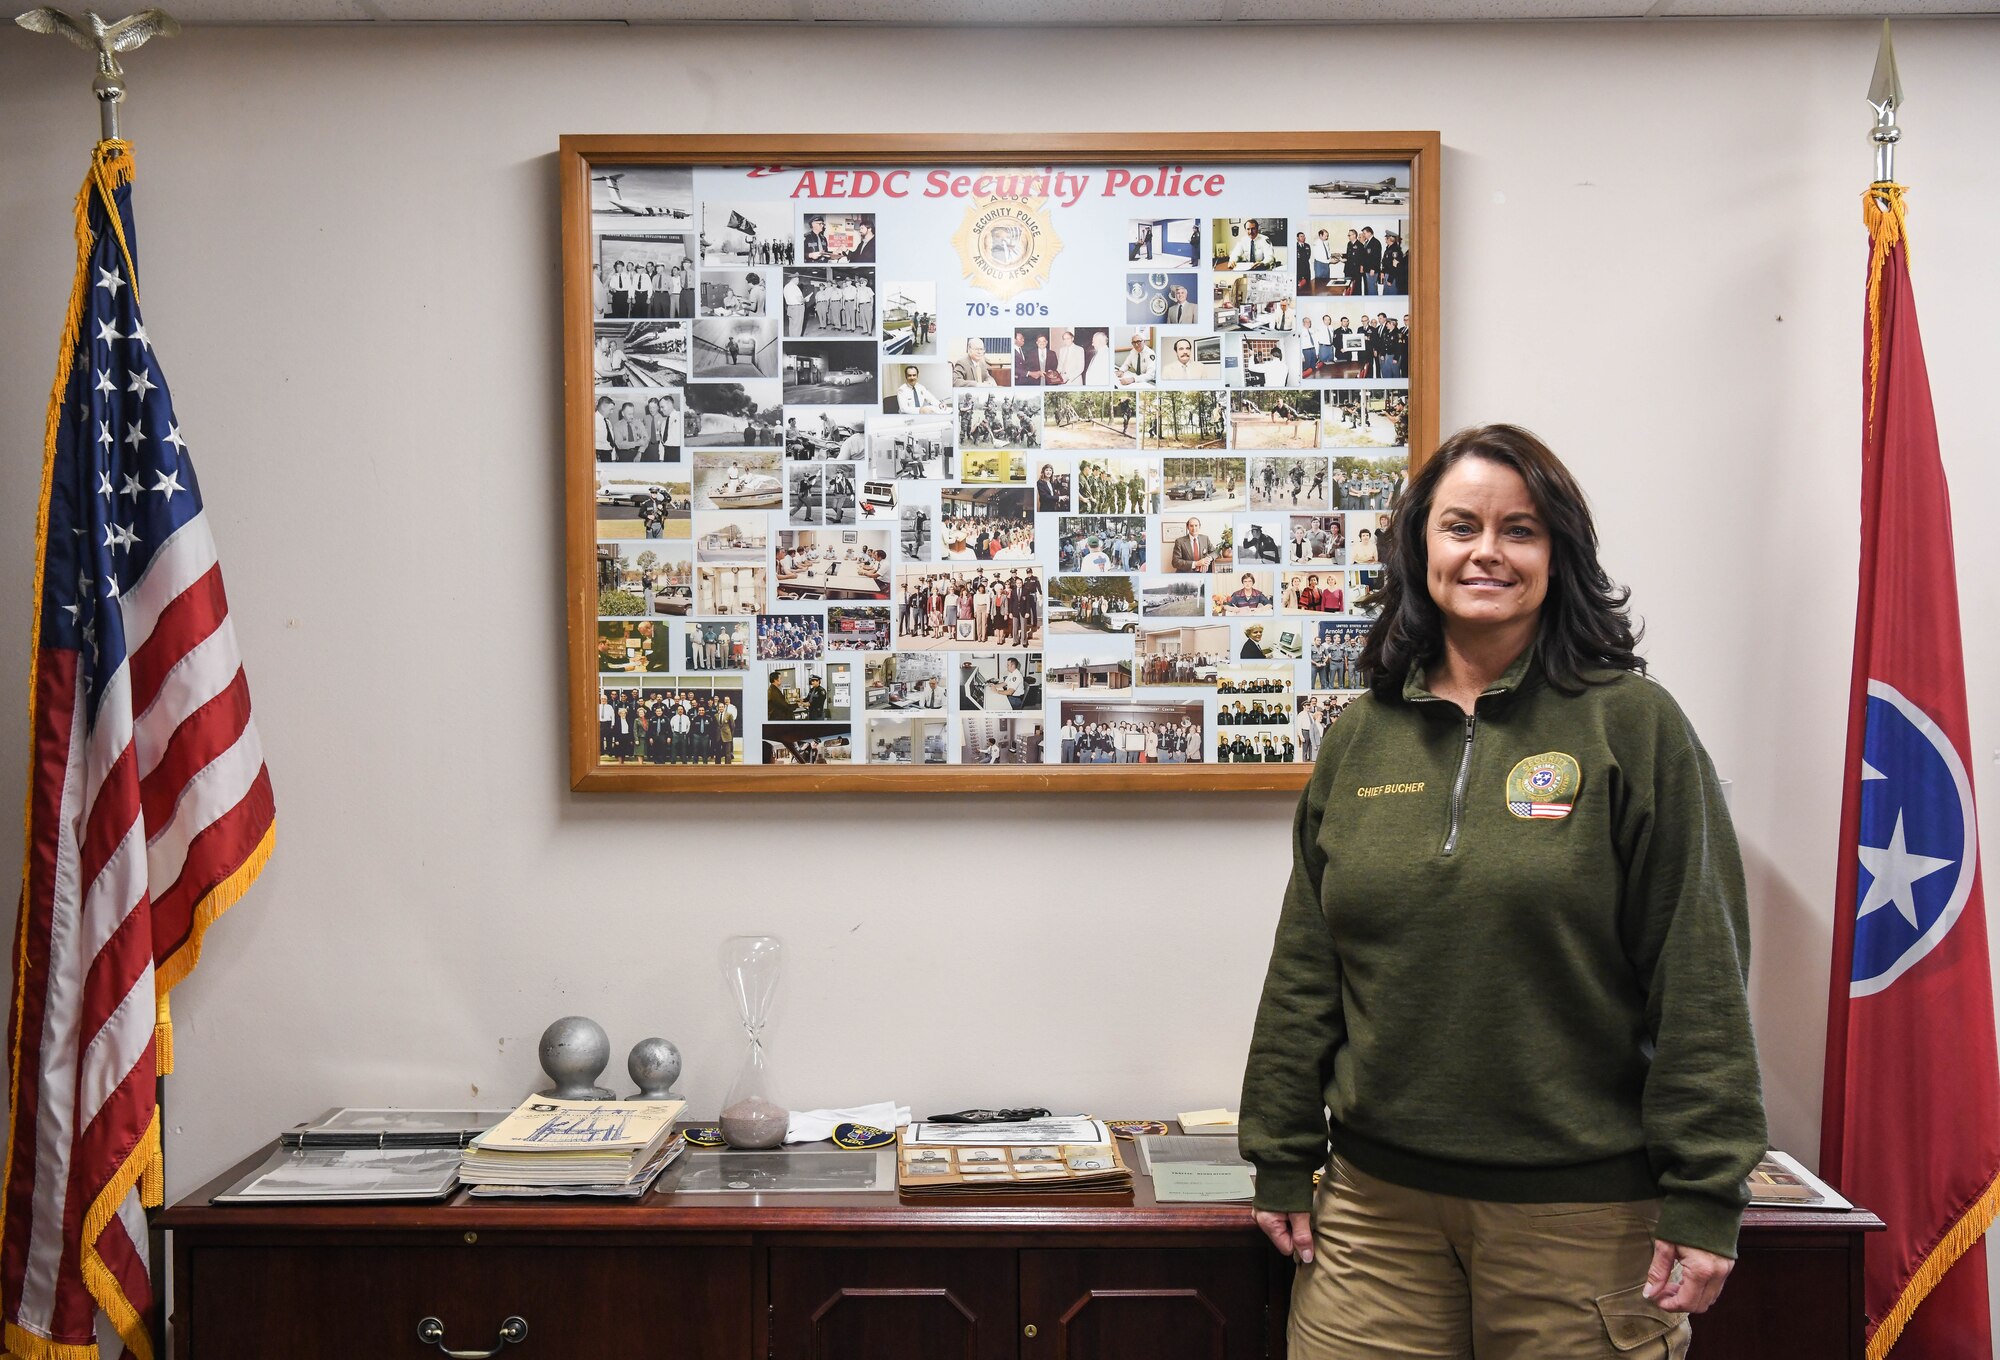 Regina Bucher, the new Security Services Supervisor at Arnold Air Force Base, Tenn., stands in front of a collage of photos showing security services personnel over the years in her office Dec. 8, 2020. She is the first female to lead the contractor security section. (U.S. Air Force photo by Jill Pickett)